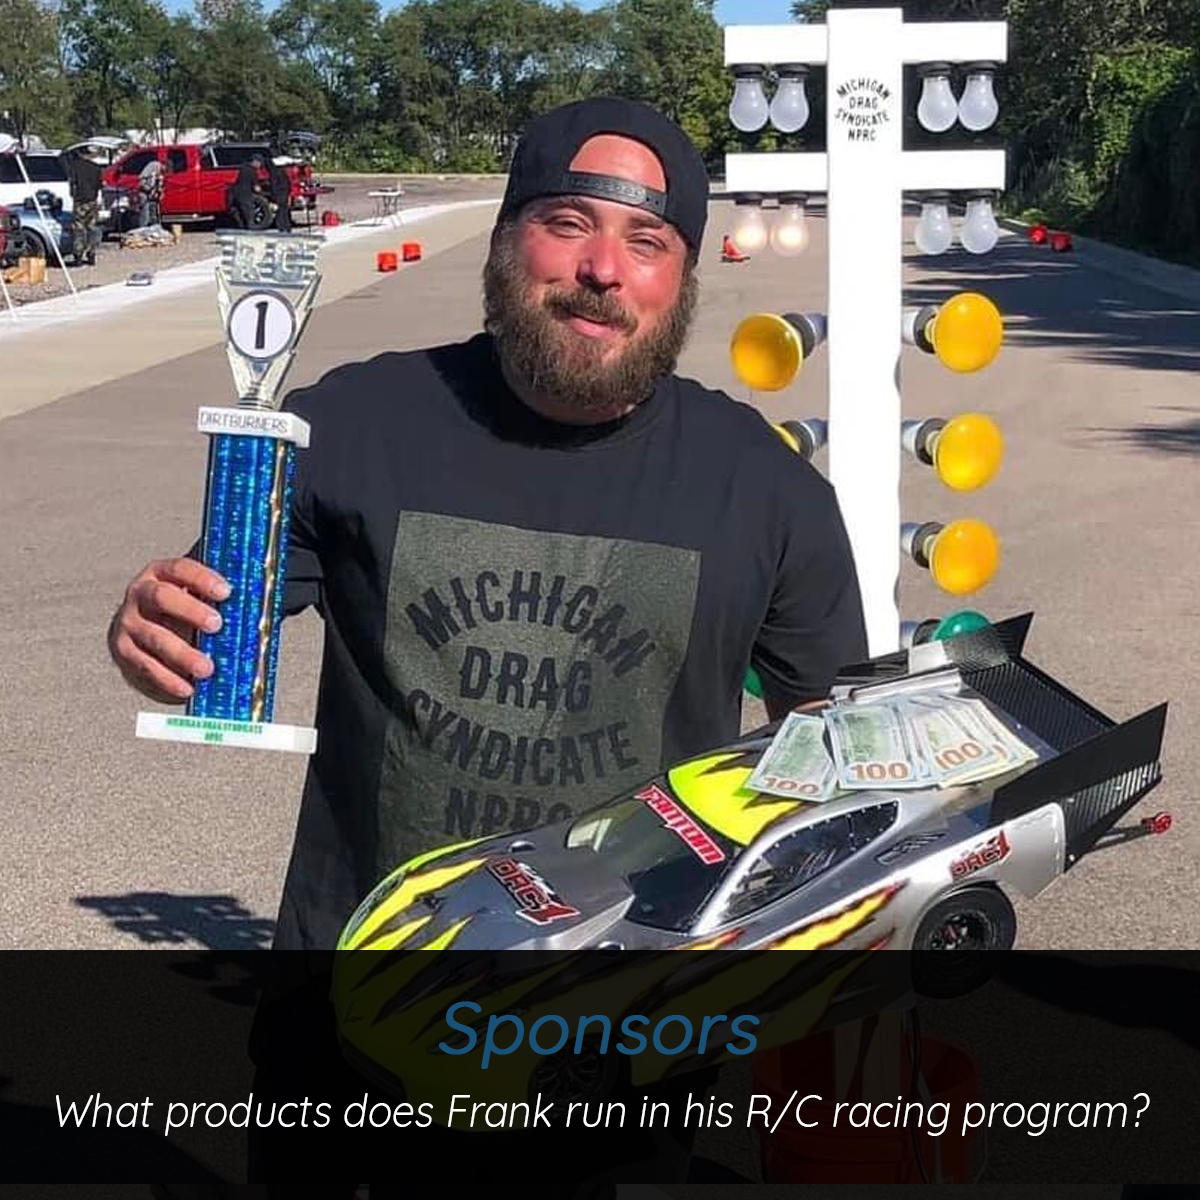 What products does Frank run in his R/C racing program?